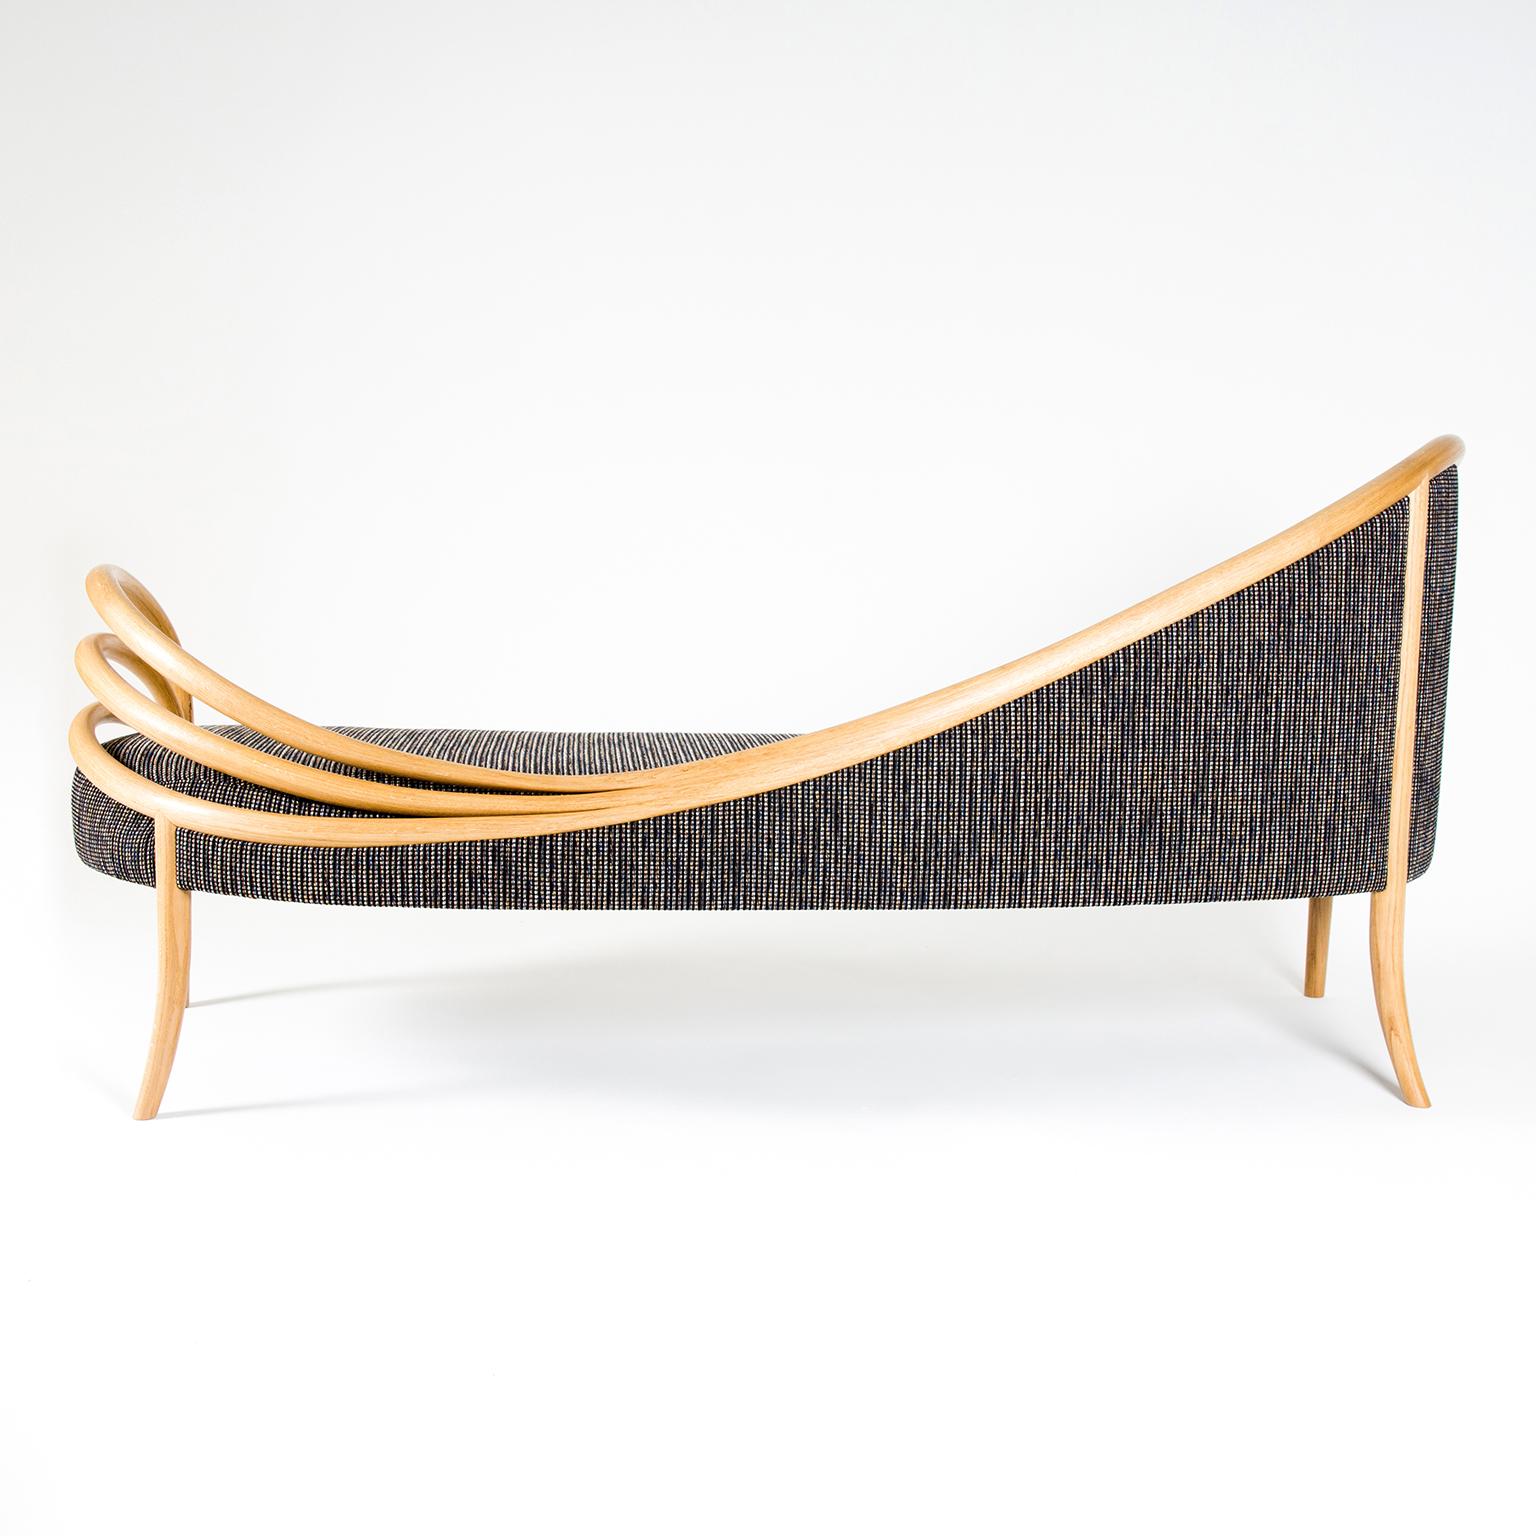 The contemporary curved and sculptural ‘Ligamentum III’ chaise longue has been designed with every twist and turn of the frame considered; from comfort at one end to sweeping elegance at the other, the lowered back reveals a stained-glass inspired